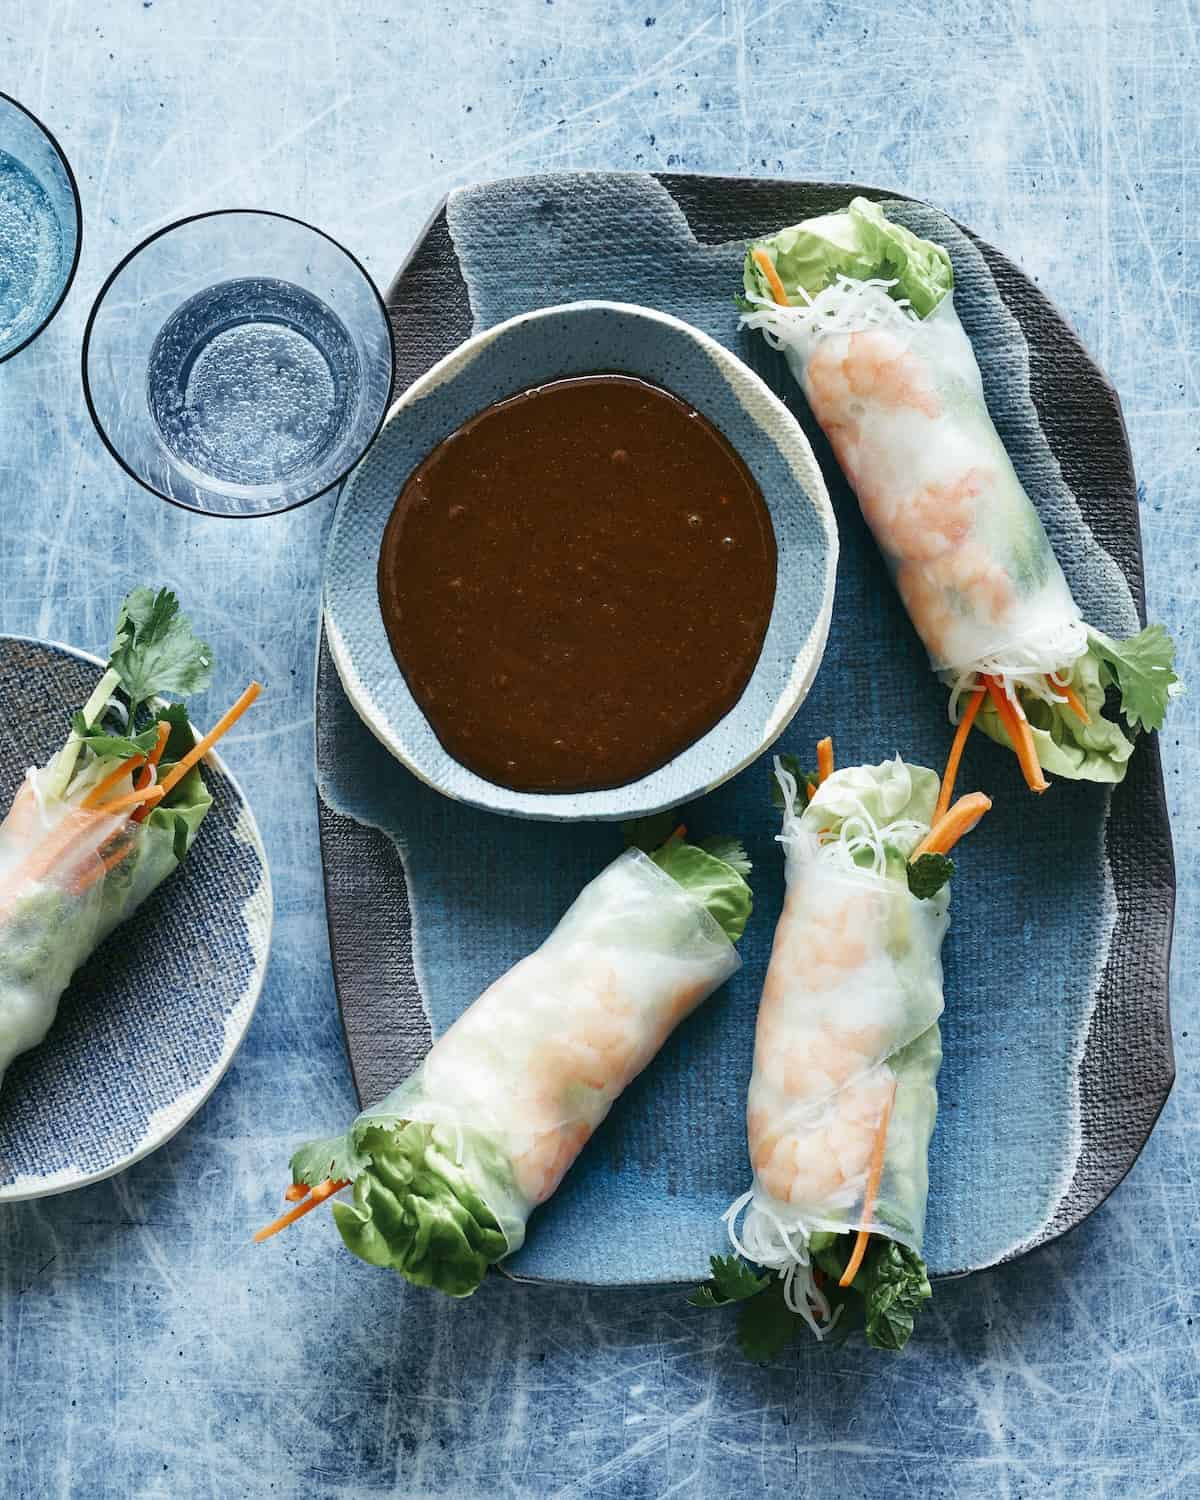 A rectangular platter with avocado shrimp spring rolls with a bowl of hoisin-peanut butter sauce for dipping, and another small plate with a spring roll served in it.